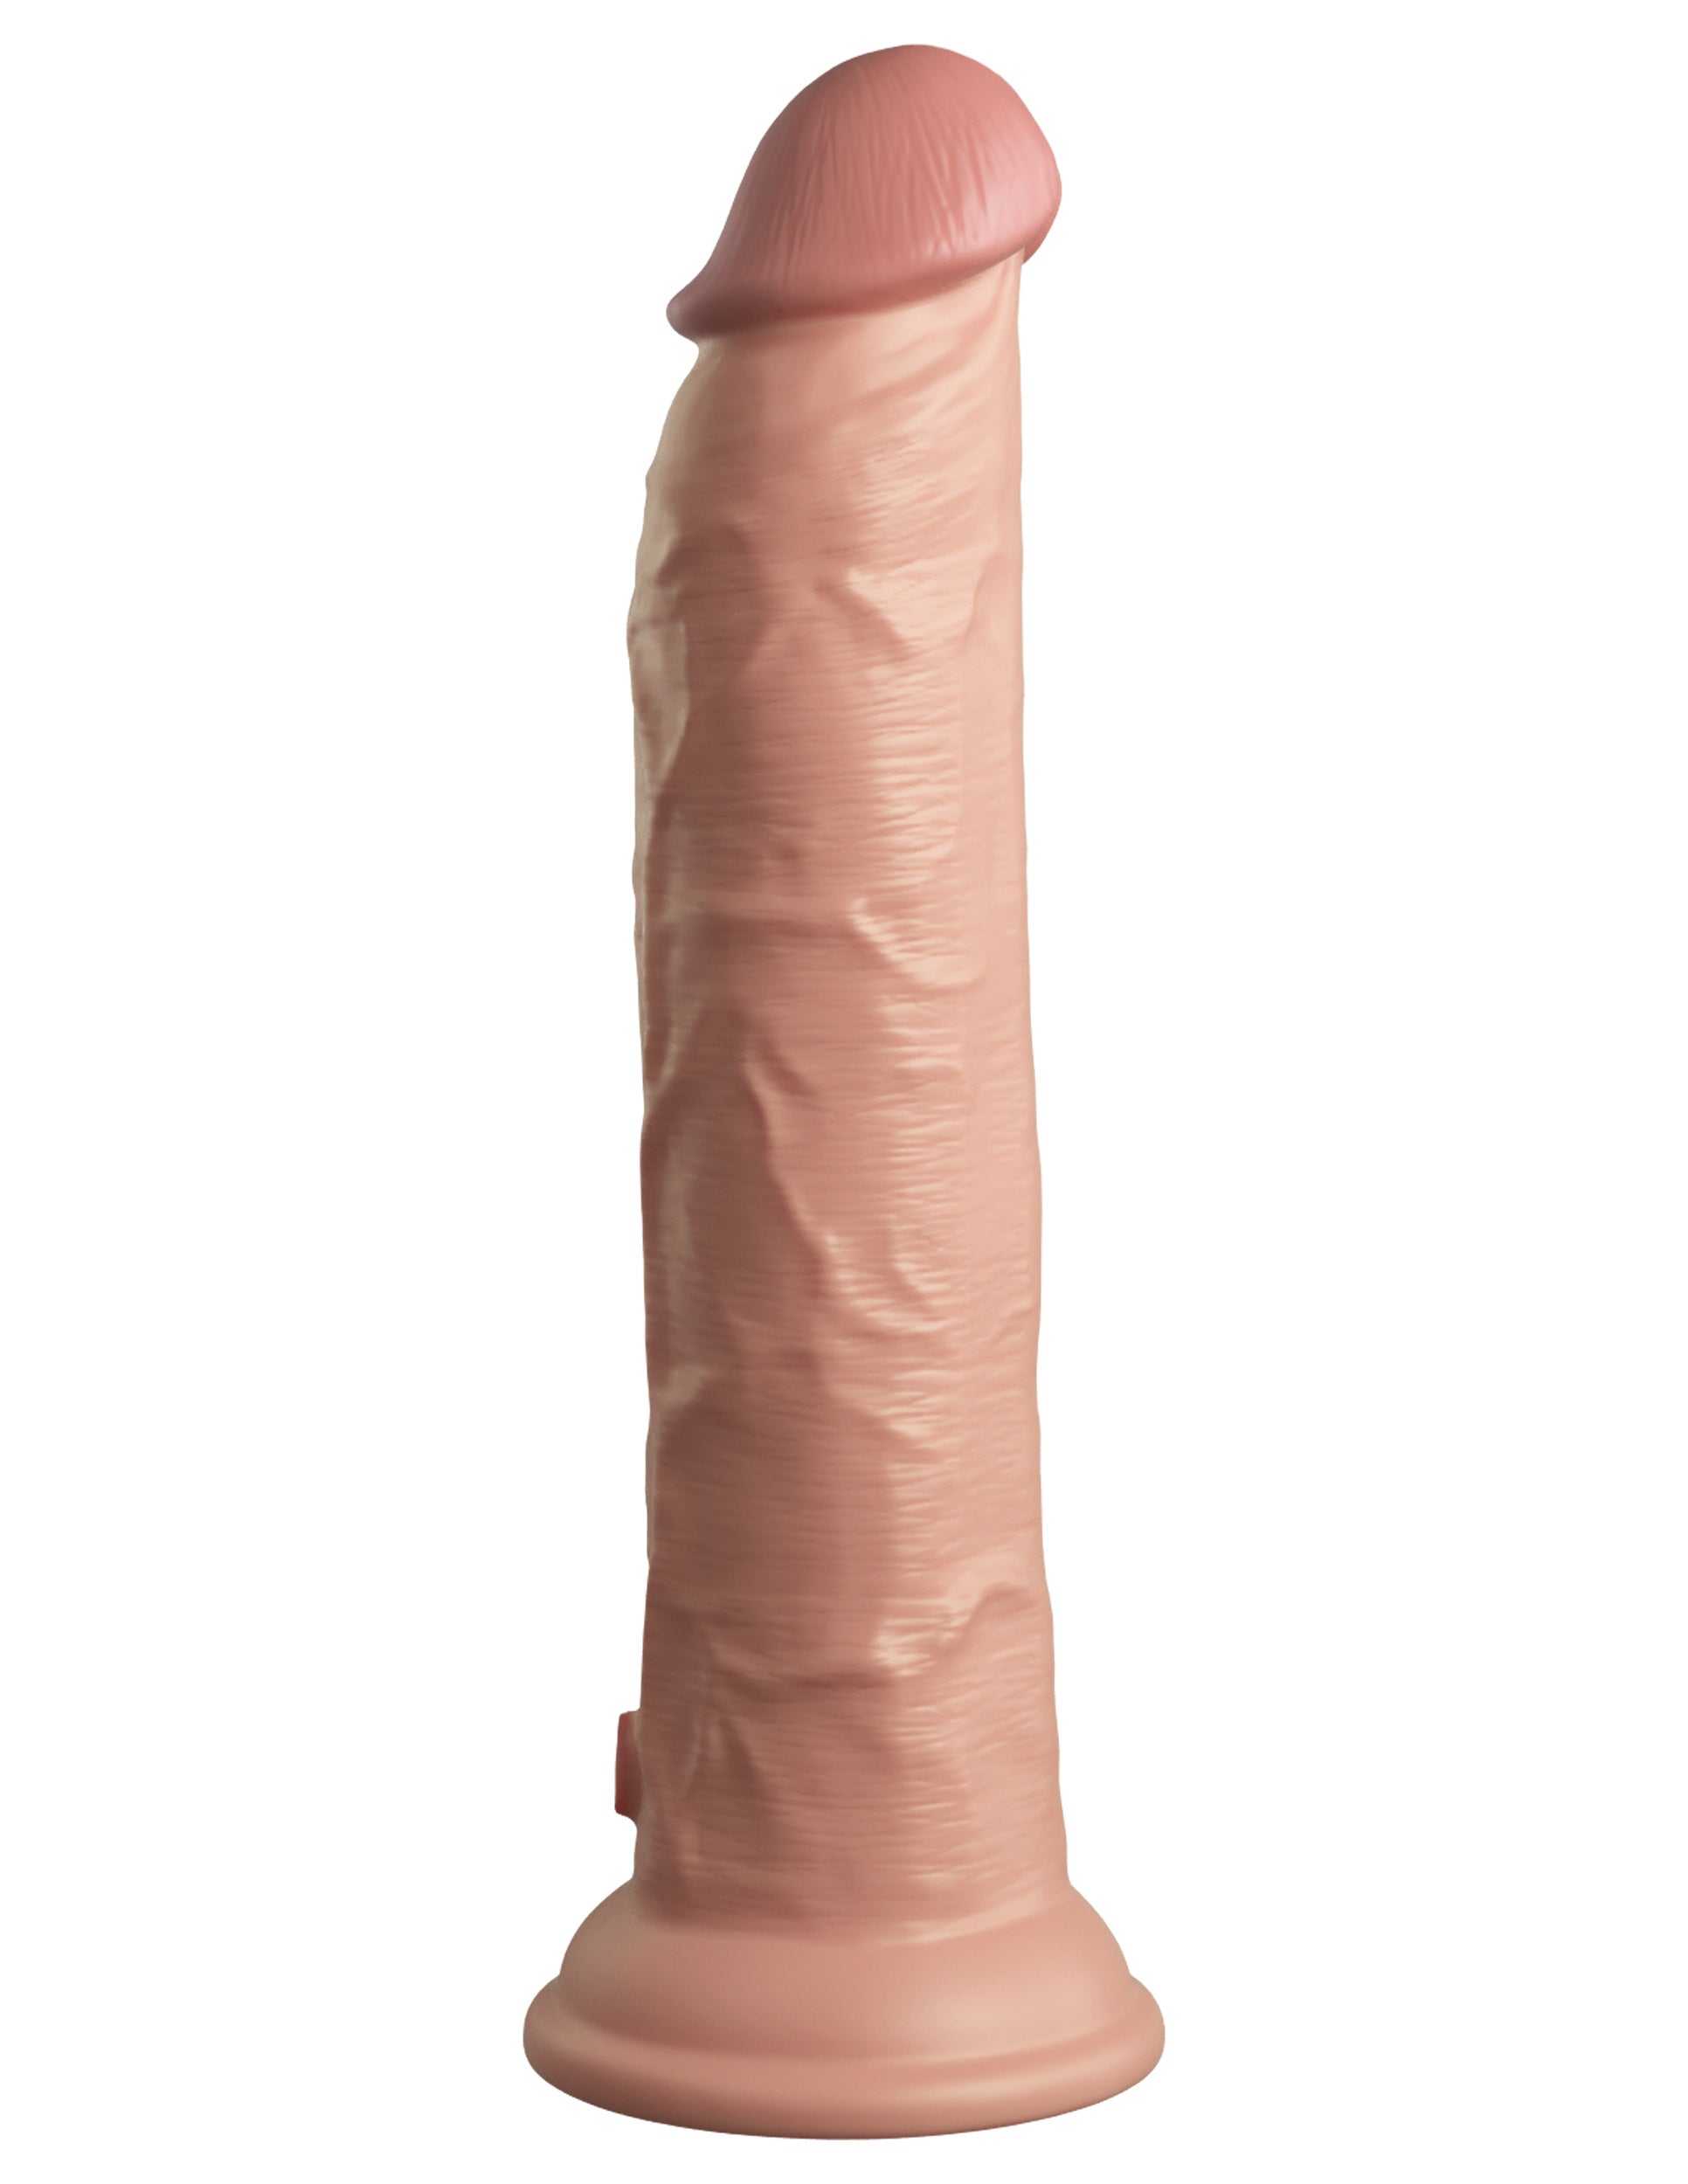 King Cock Elite 9 Inch Vibrating Silicone Dual  Density Cock With Remote - Light-6